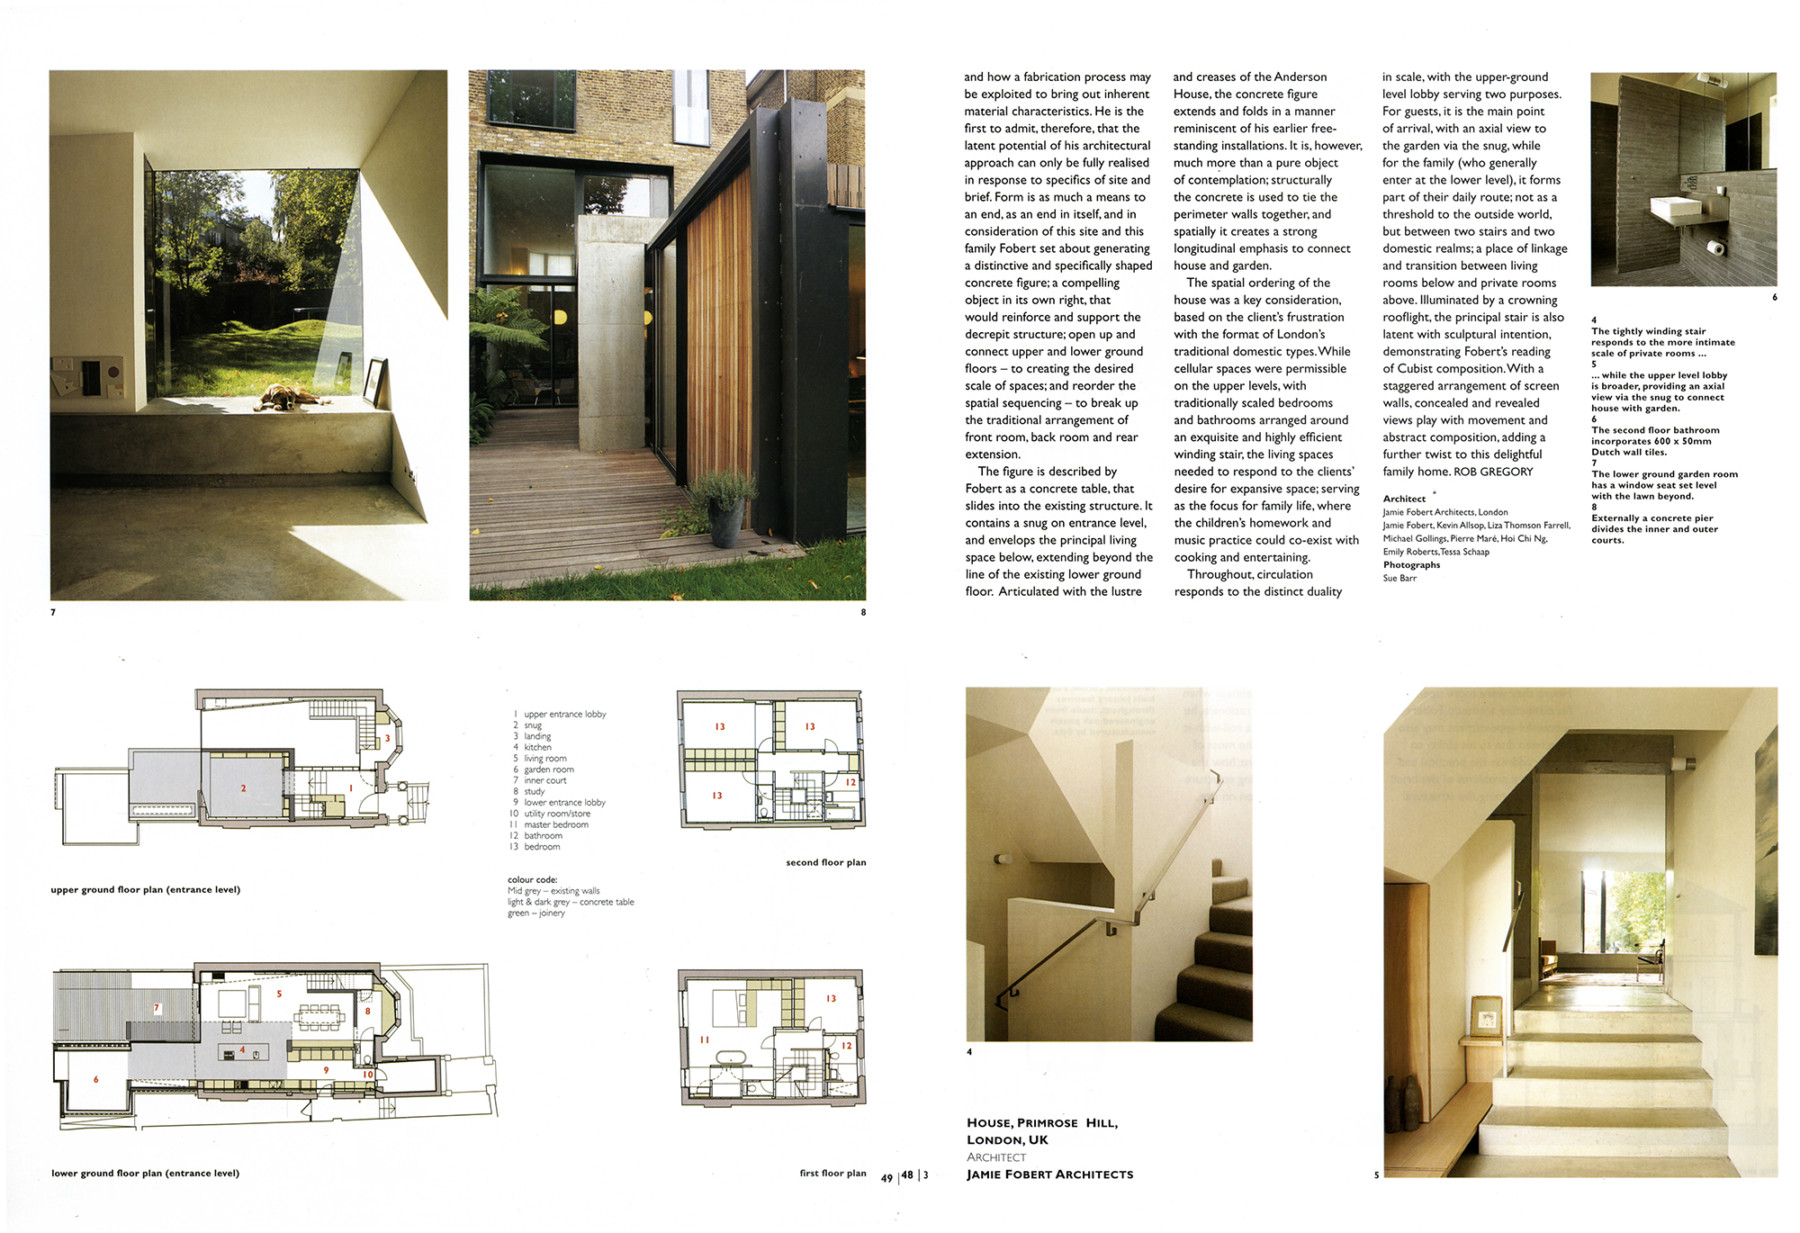 Jamie-Fobert-Architects-Kander-House-Inner-Realm-Article-page2